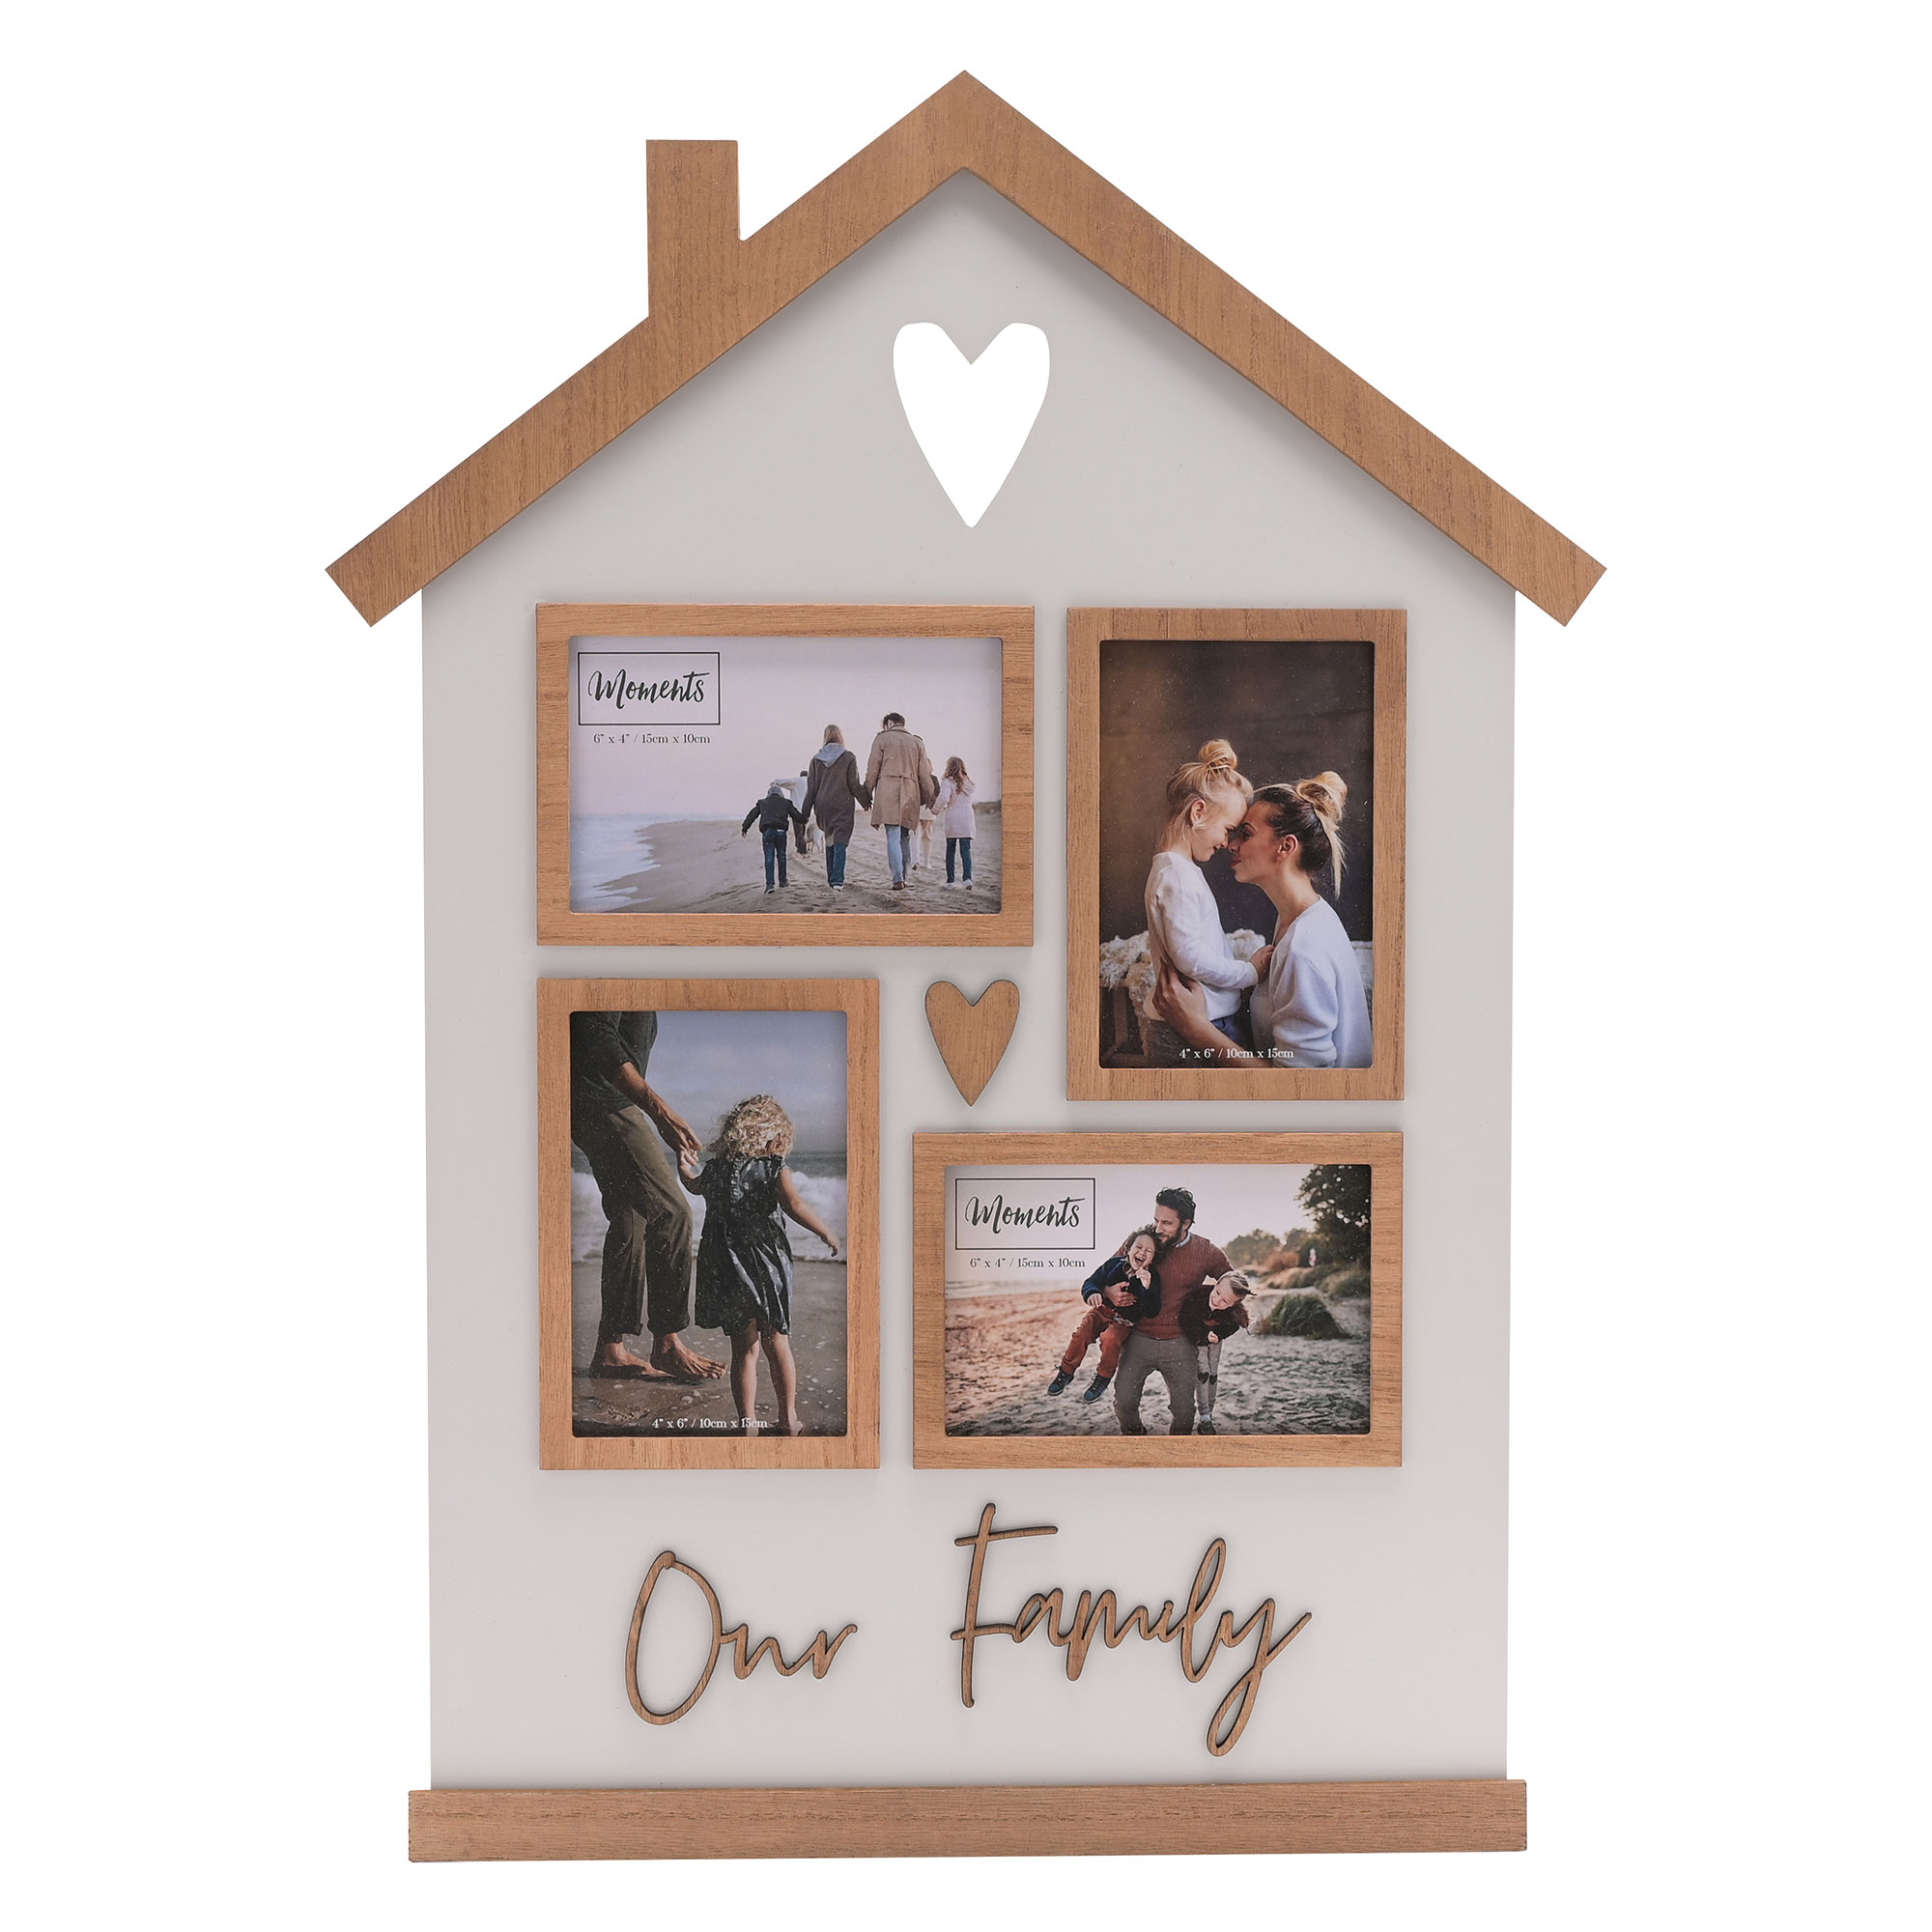 Our Family House-Shaped Collage Photo Frame